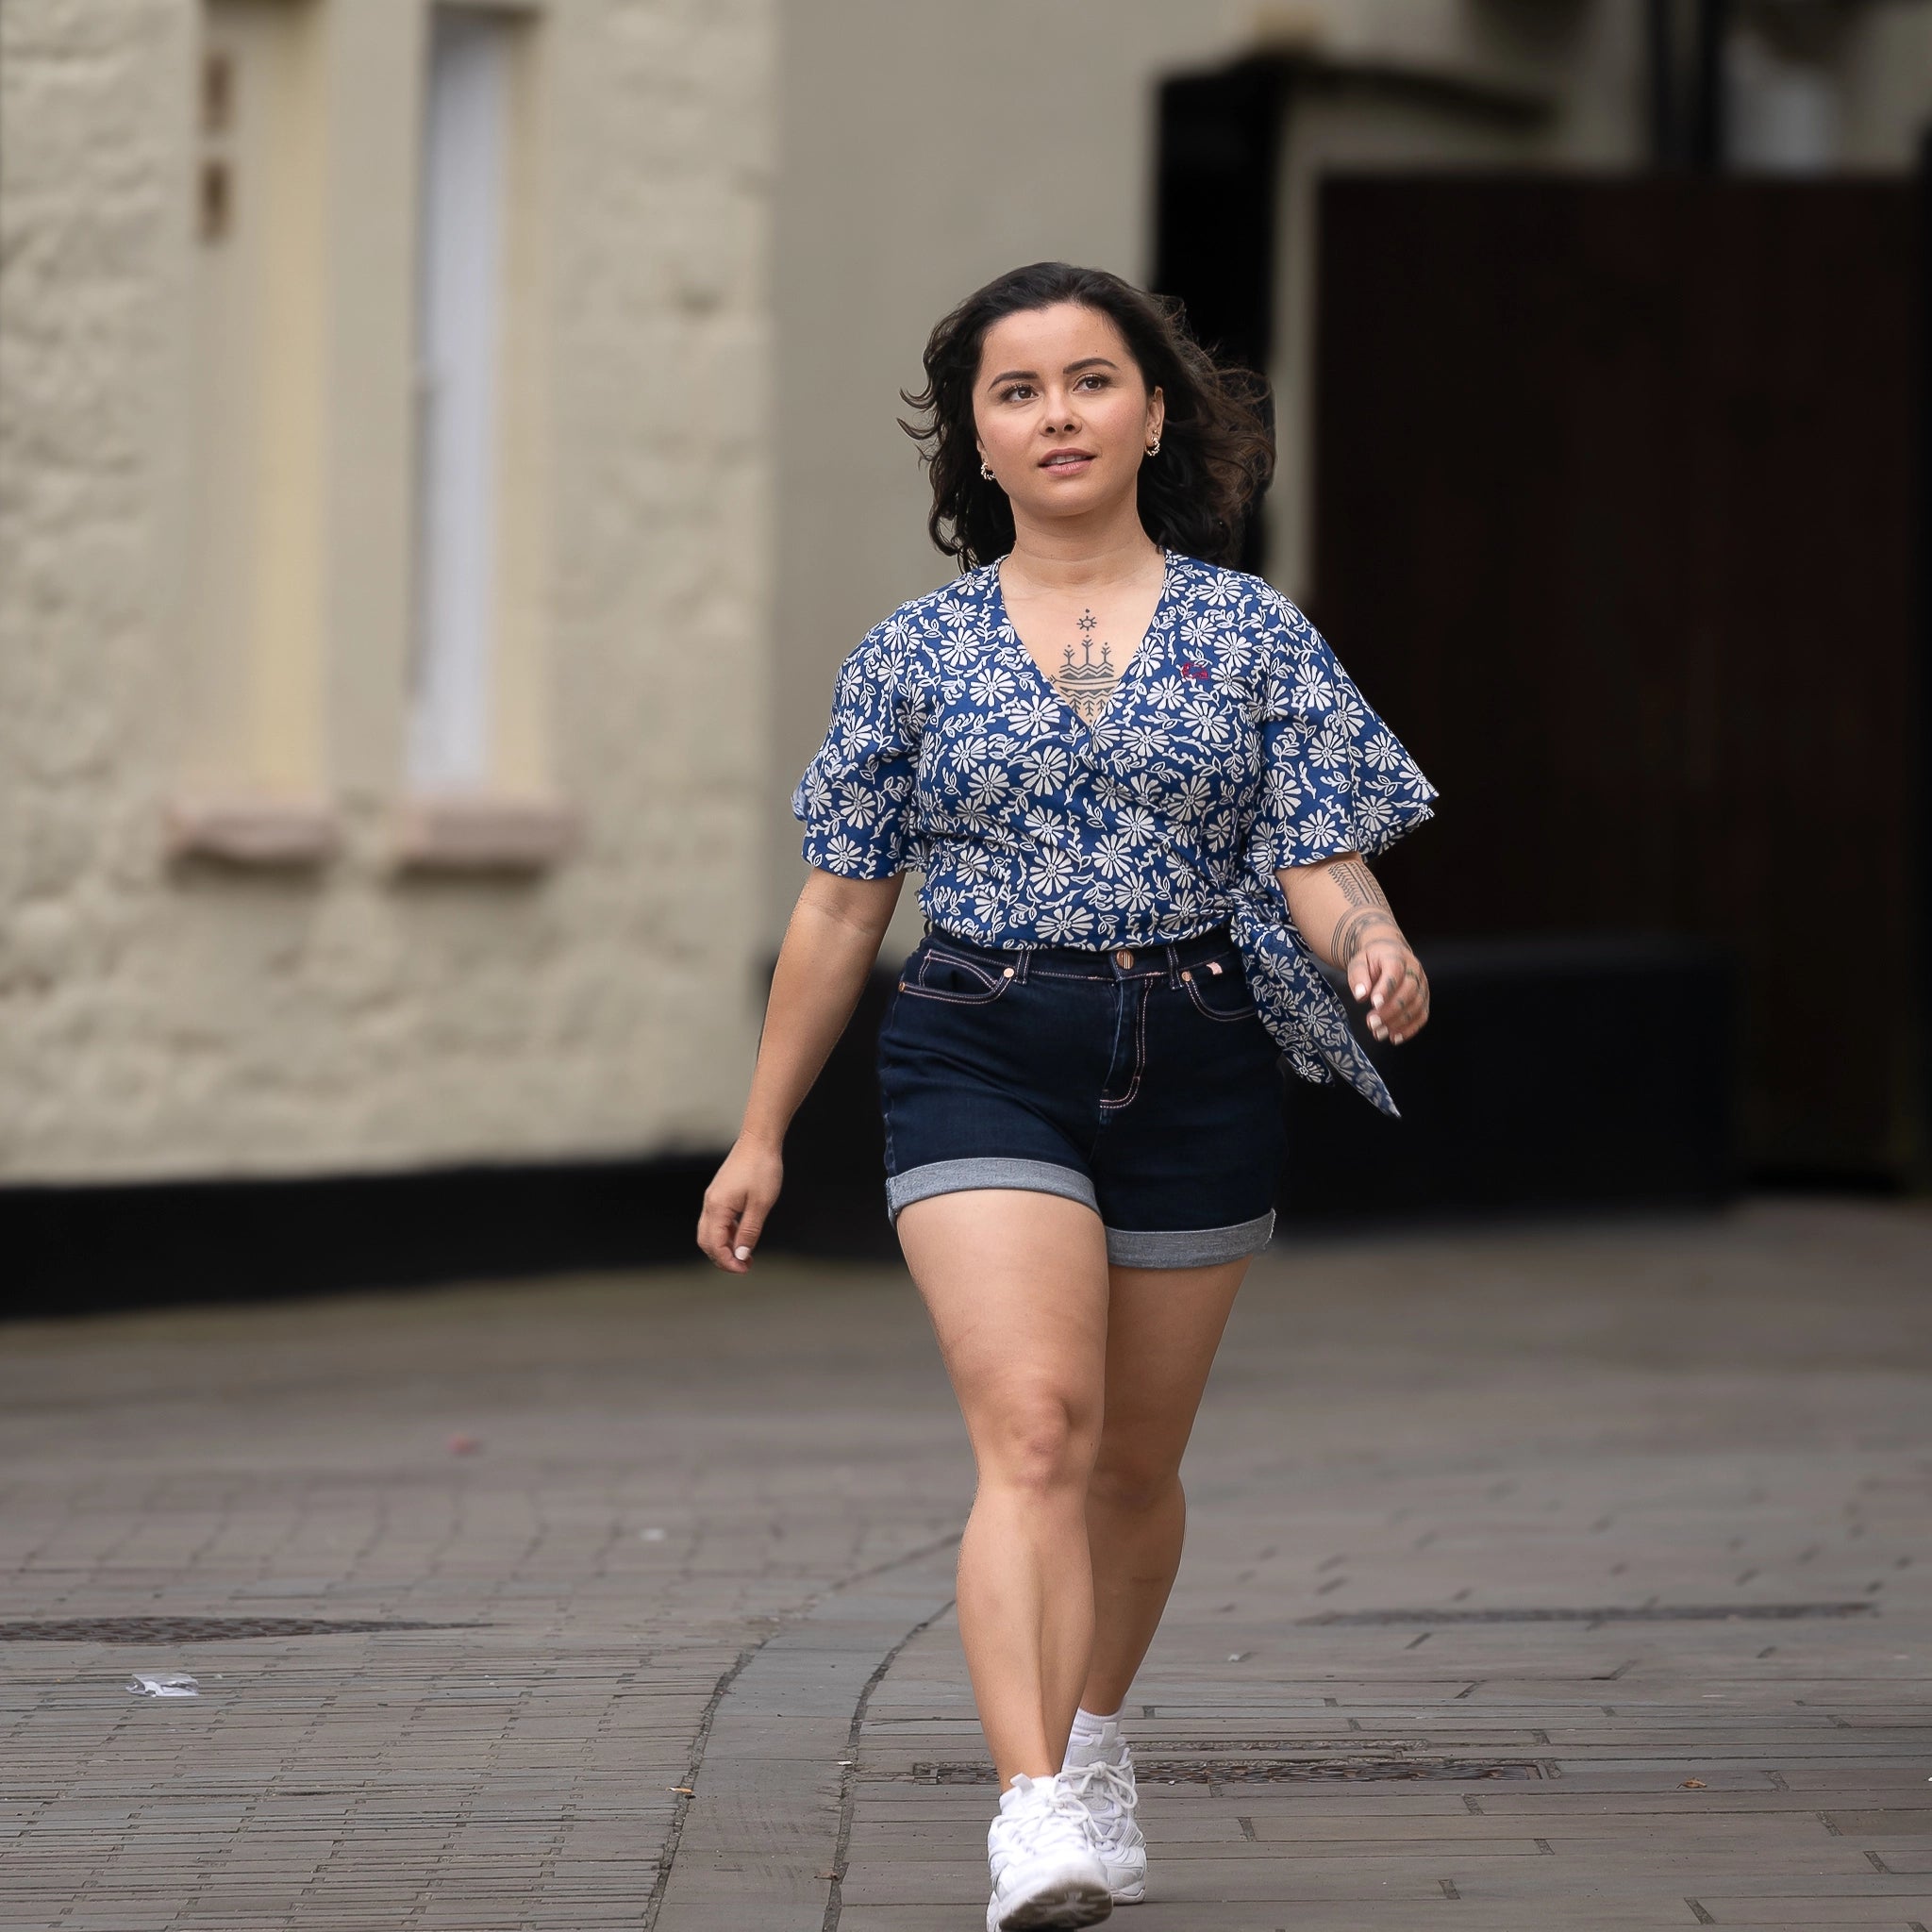 A person with short brown hair wearing a SereneBloom Women's Eco-Friendly Wrap Top - Blue Bliss, denim shorts, and white shoes is walking on a paved street near a building. Embracing sustainable fashion, their attire features the SereneBloom Women's Eco-Friendly Wrap Top by Karee.